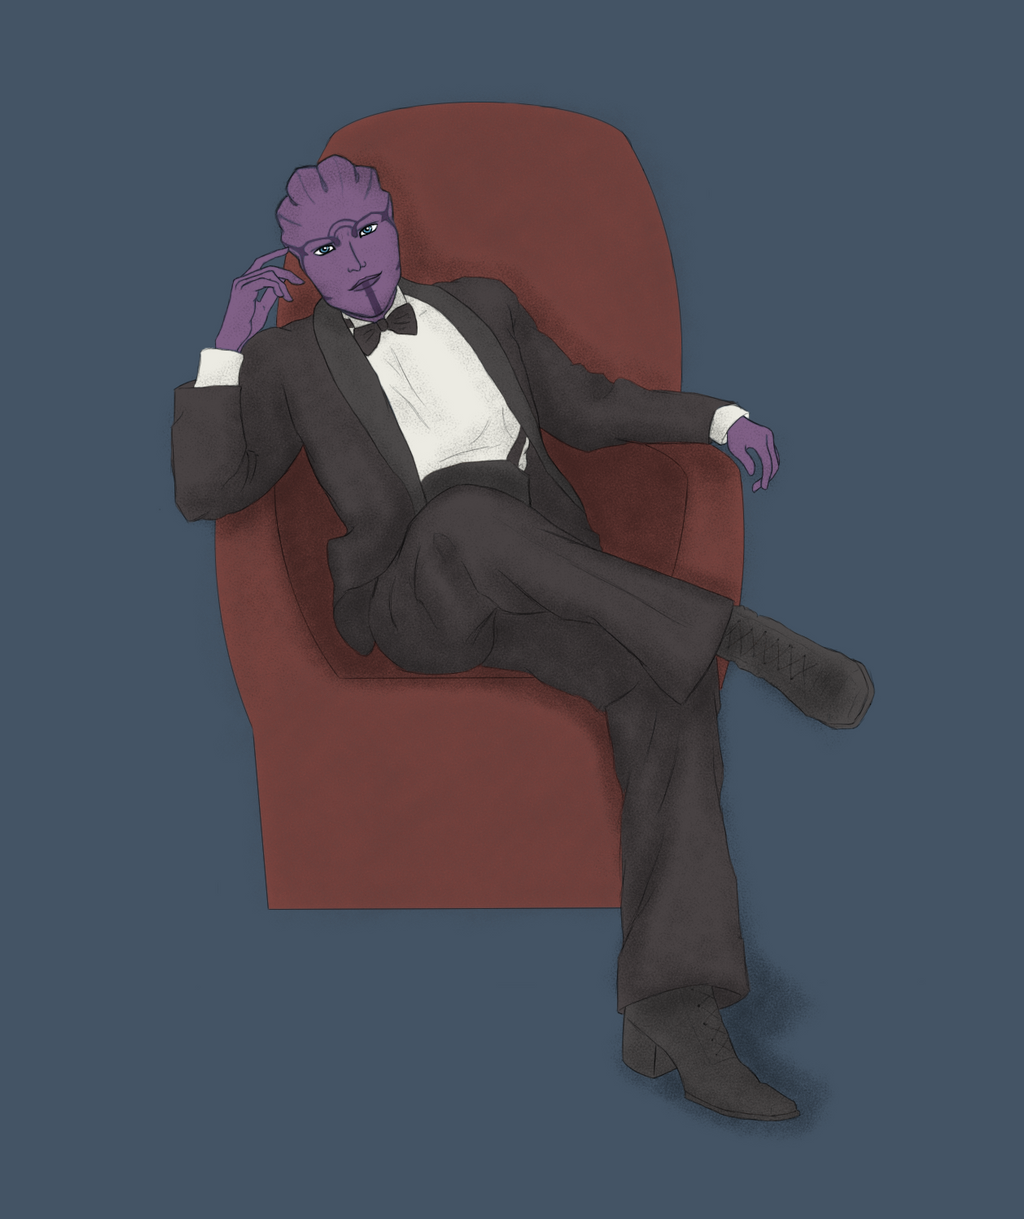 aria_t_loak___black_tie_by_i_anon-d62ww9p.png